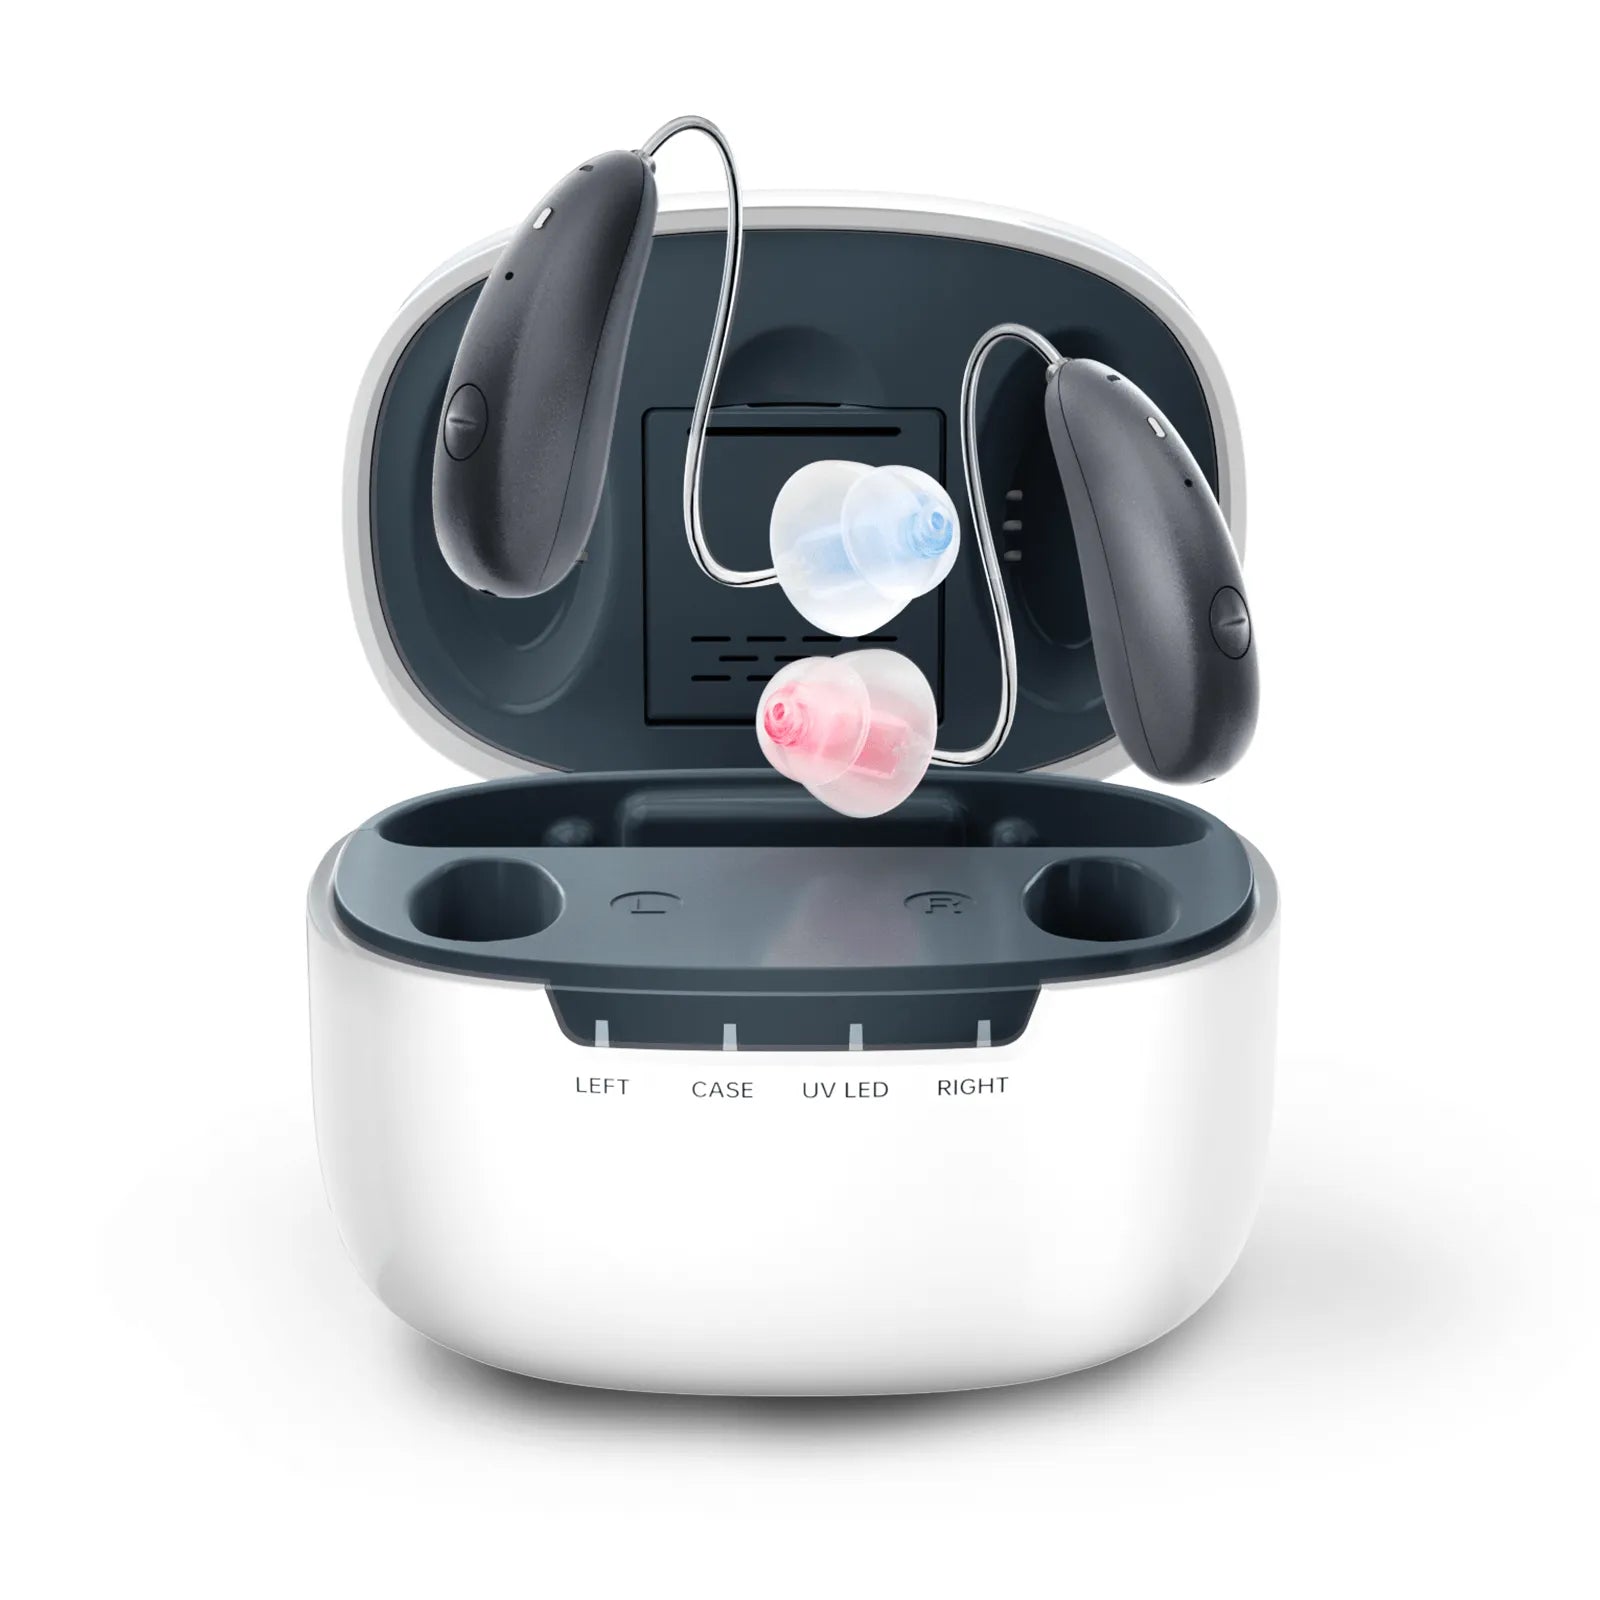 Ceretone Beacon hearing aids available over the counter